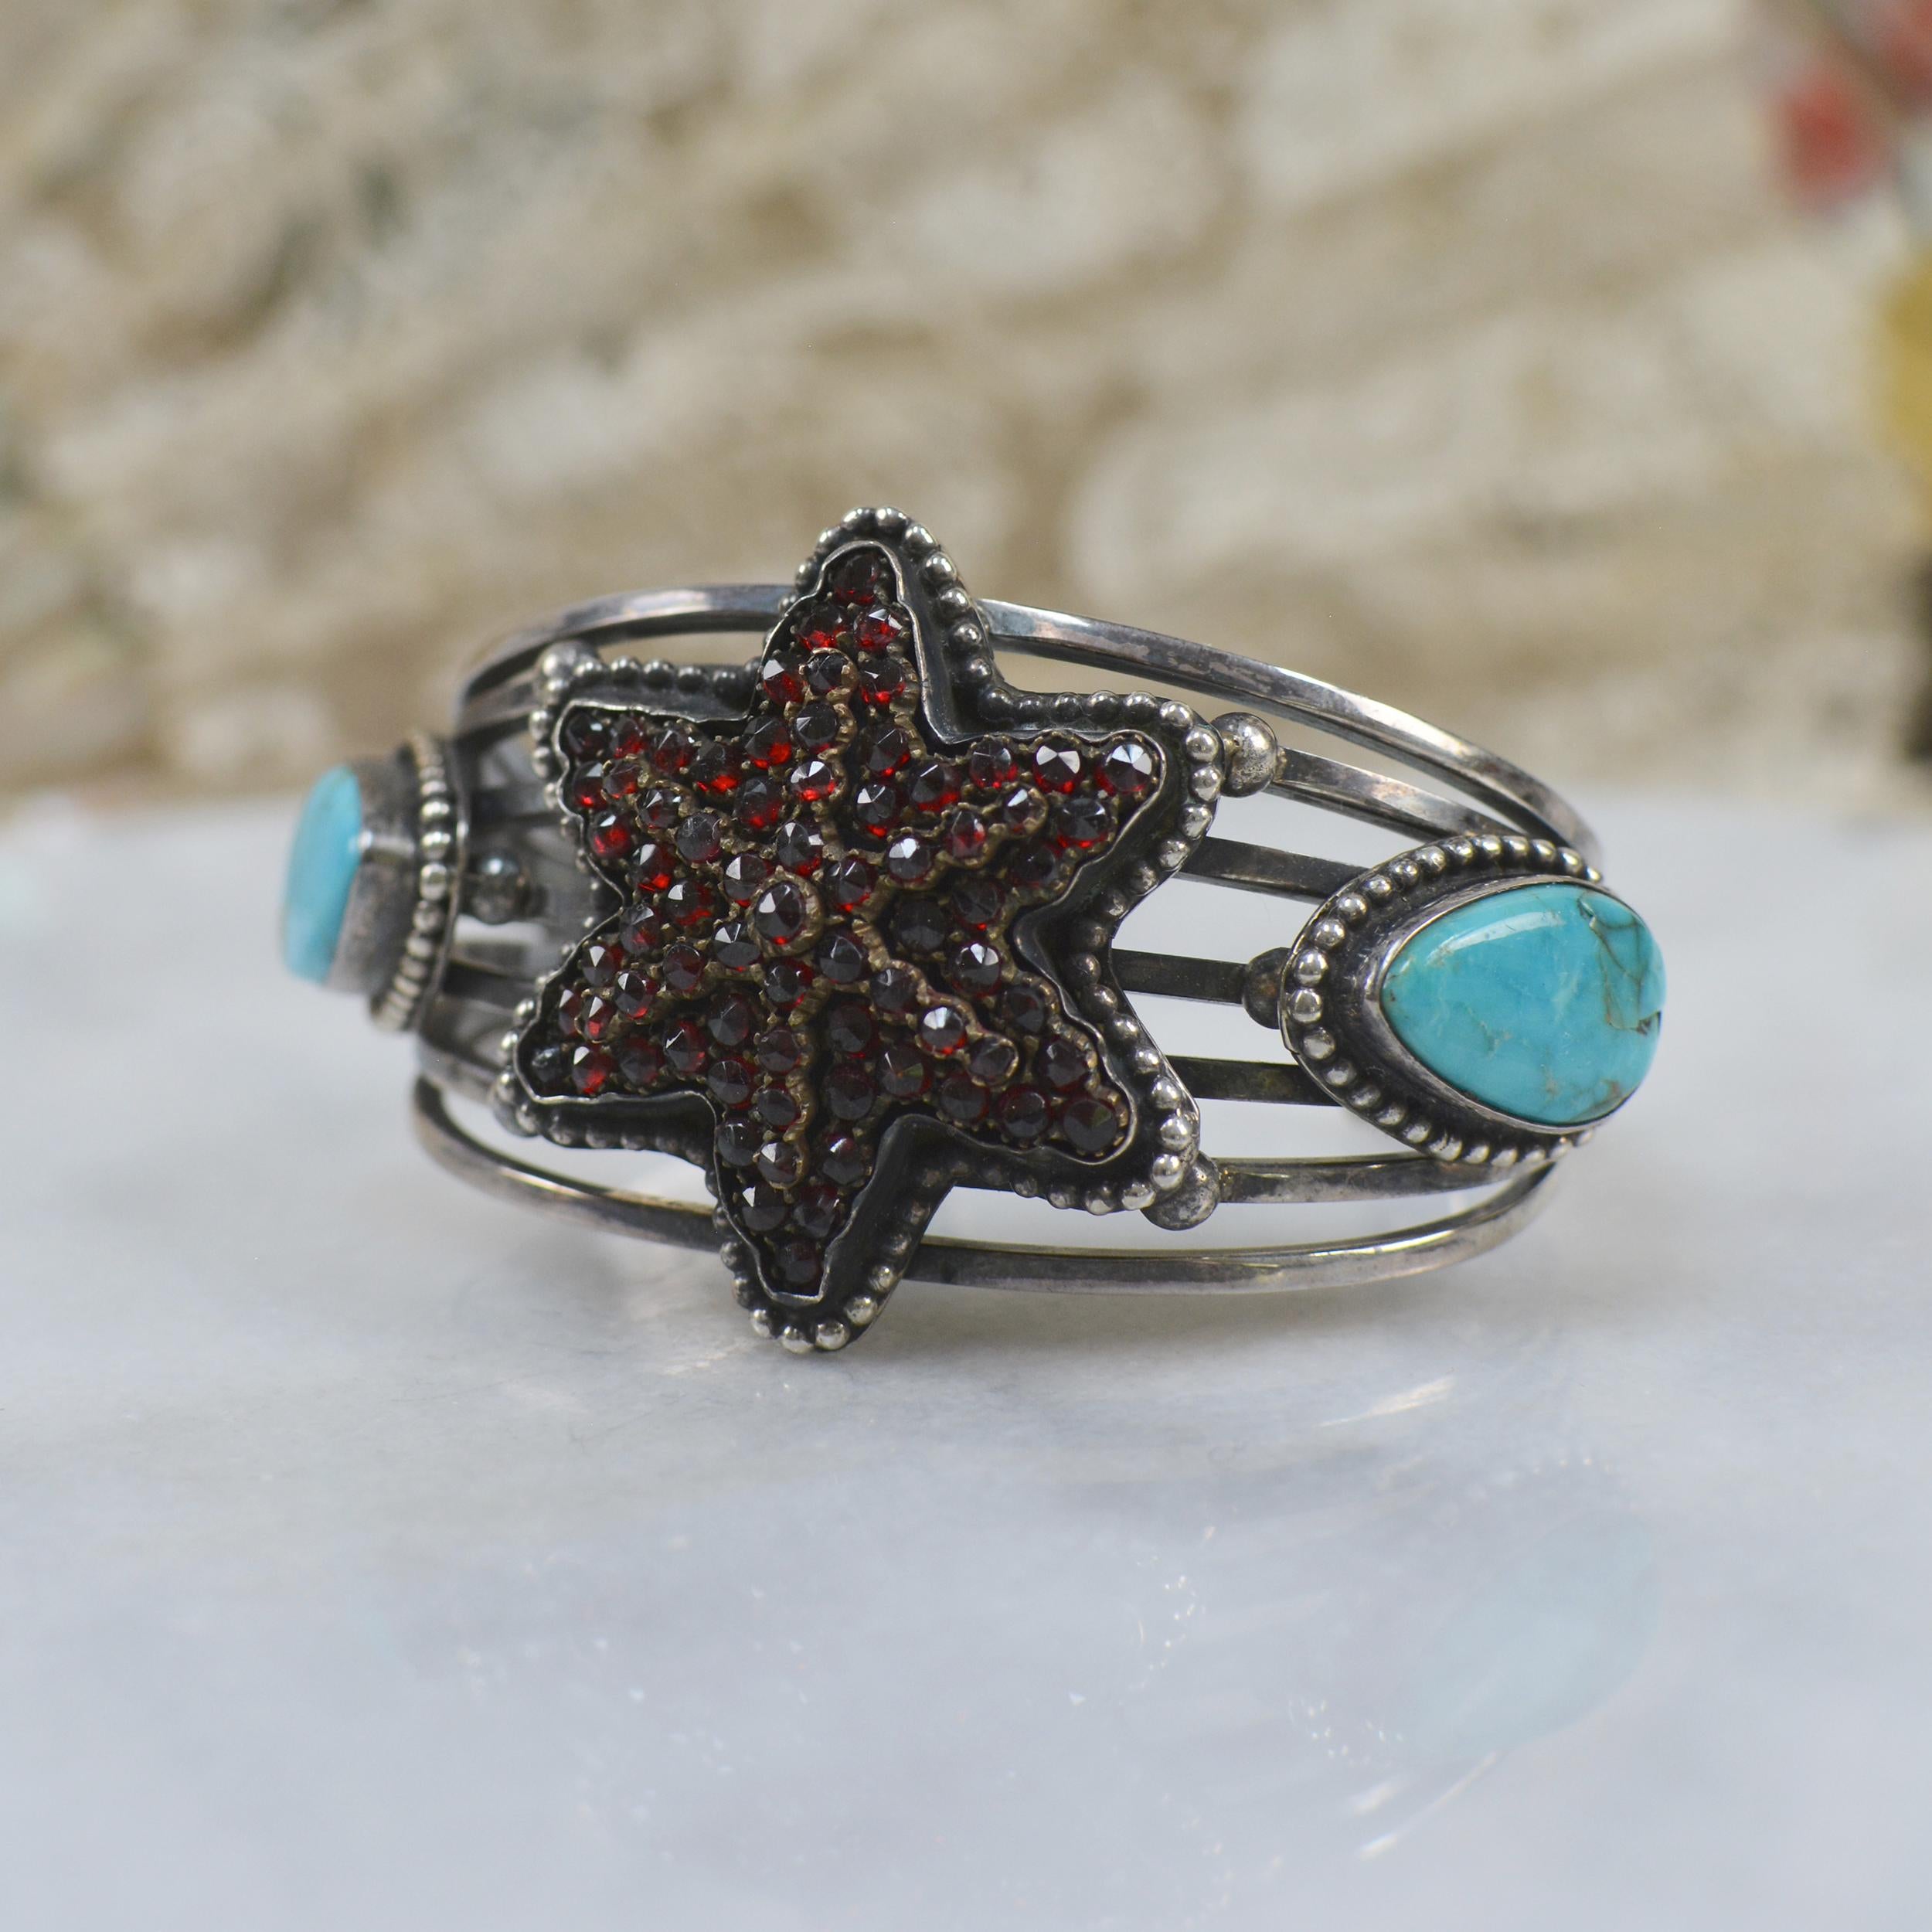 This divine Jill Garber cuff bracelet has been designed and created to feature an exquisite nineteenth century antique Victorian Bohemian garnet star. All rose cut natural garnets are mounted in original old gold vermeil prong mountings. East meets